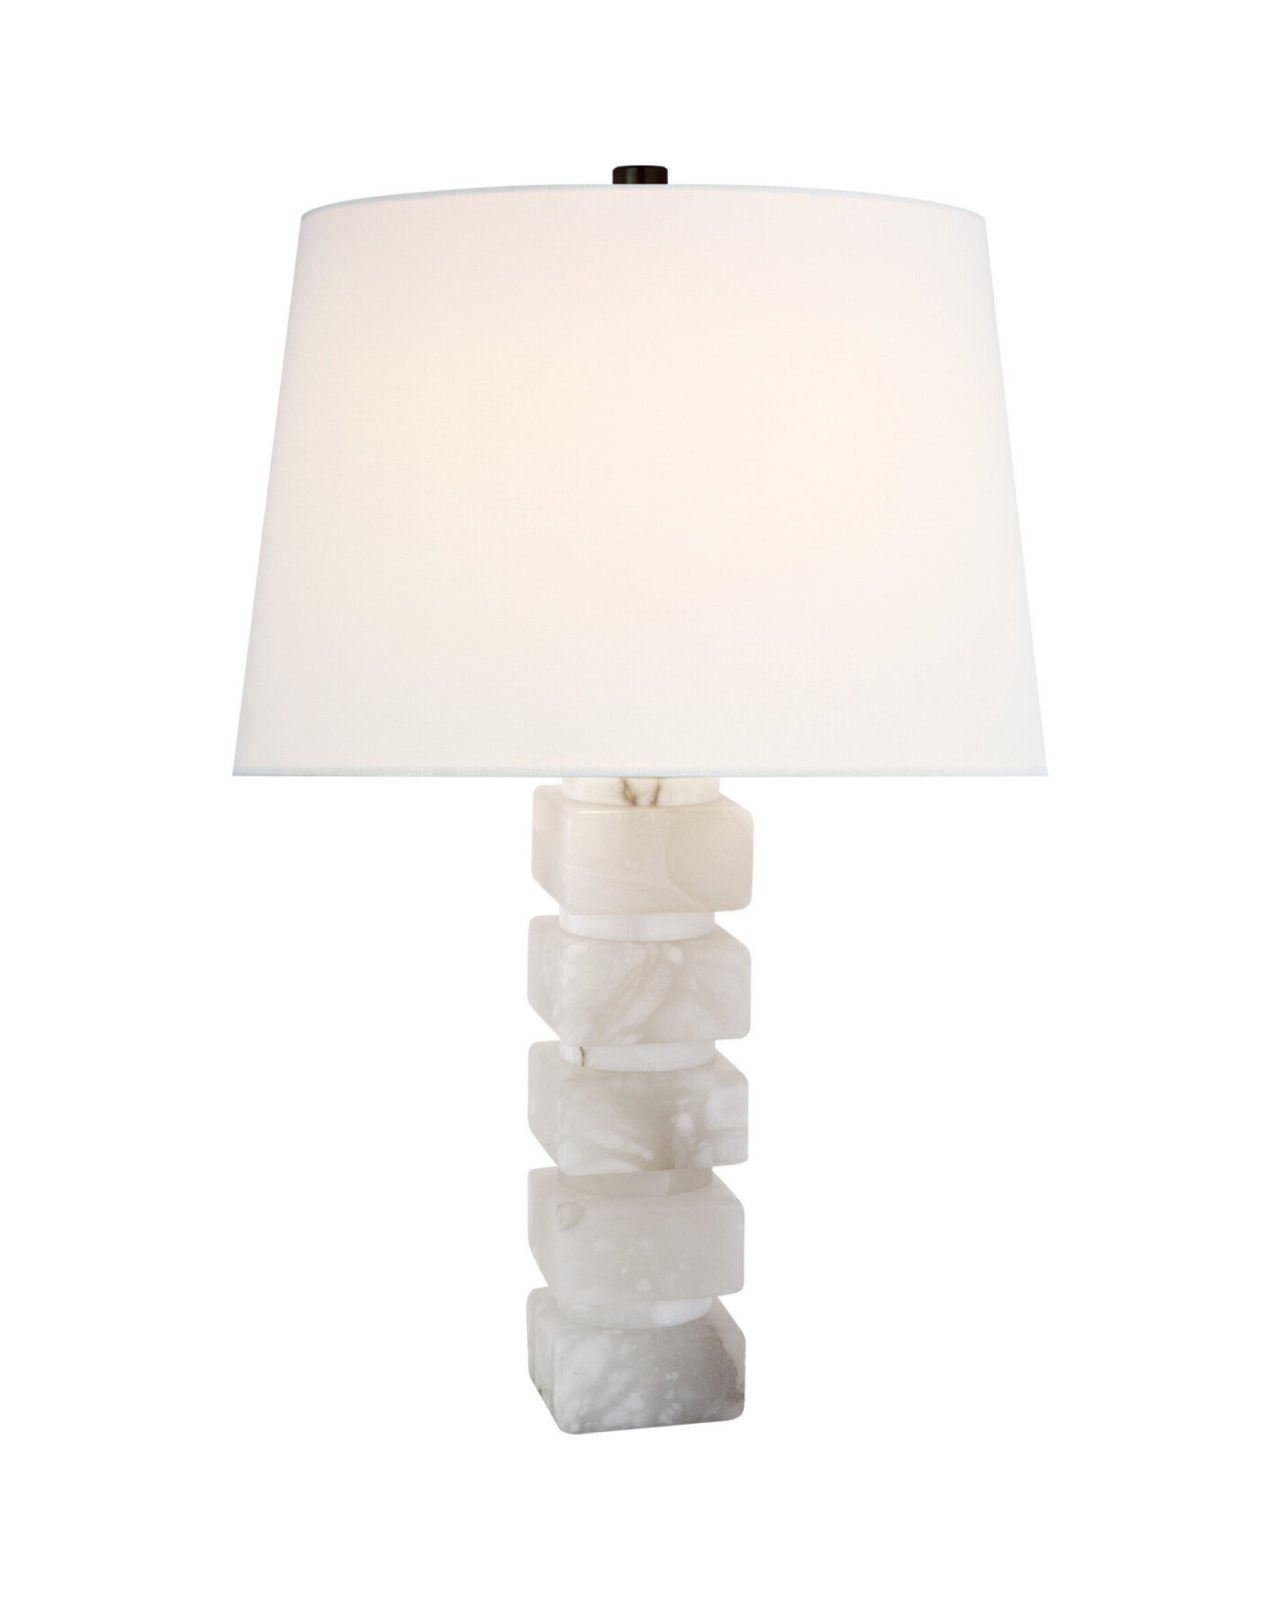 Square Chunky Stacked Table Lamp Alabaster/Linen